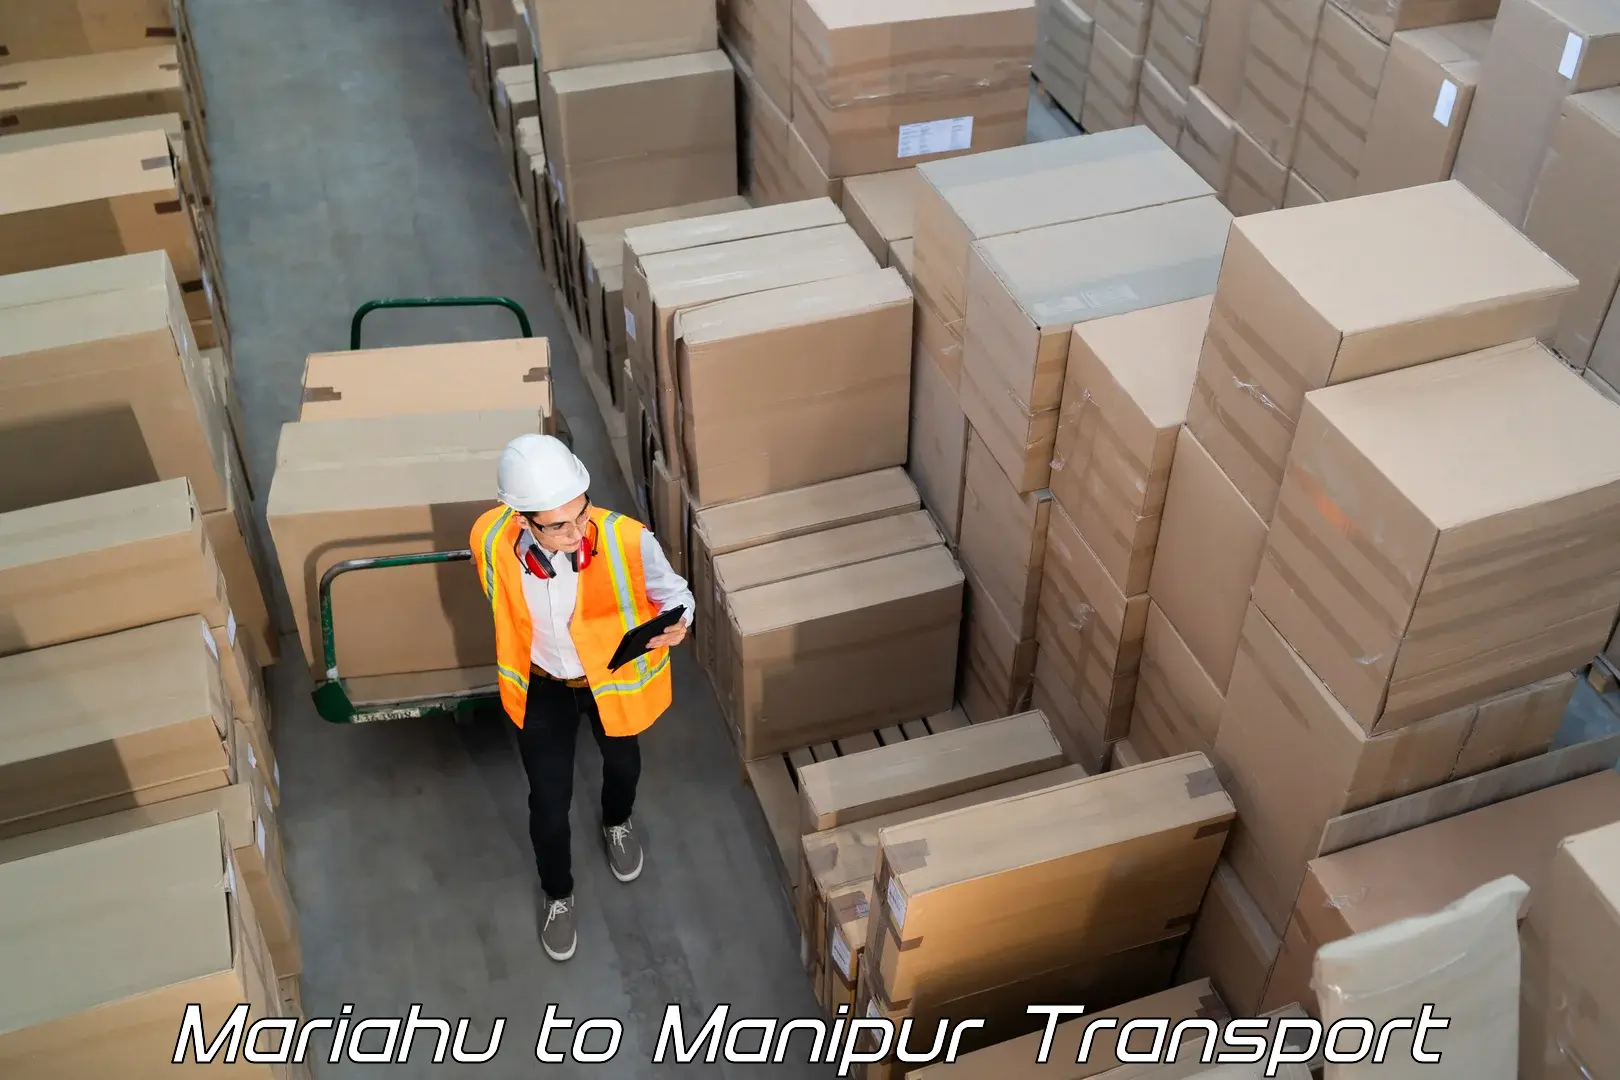 Daily parcel service transport Mariahu to Kanti